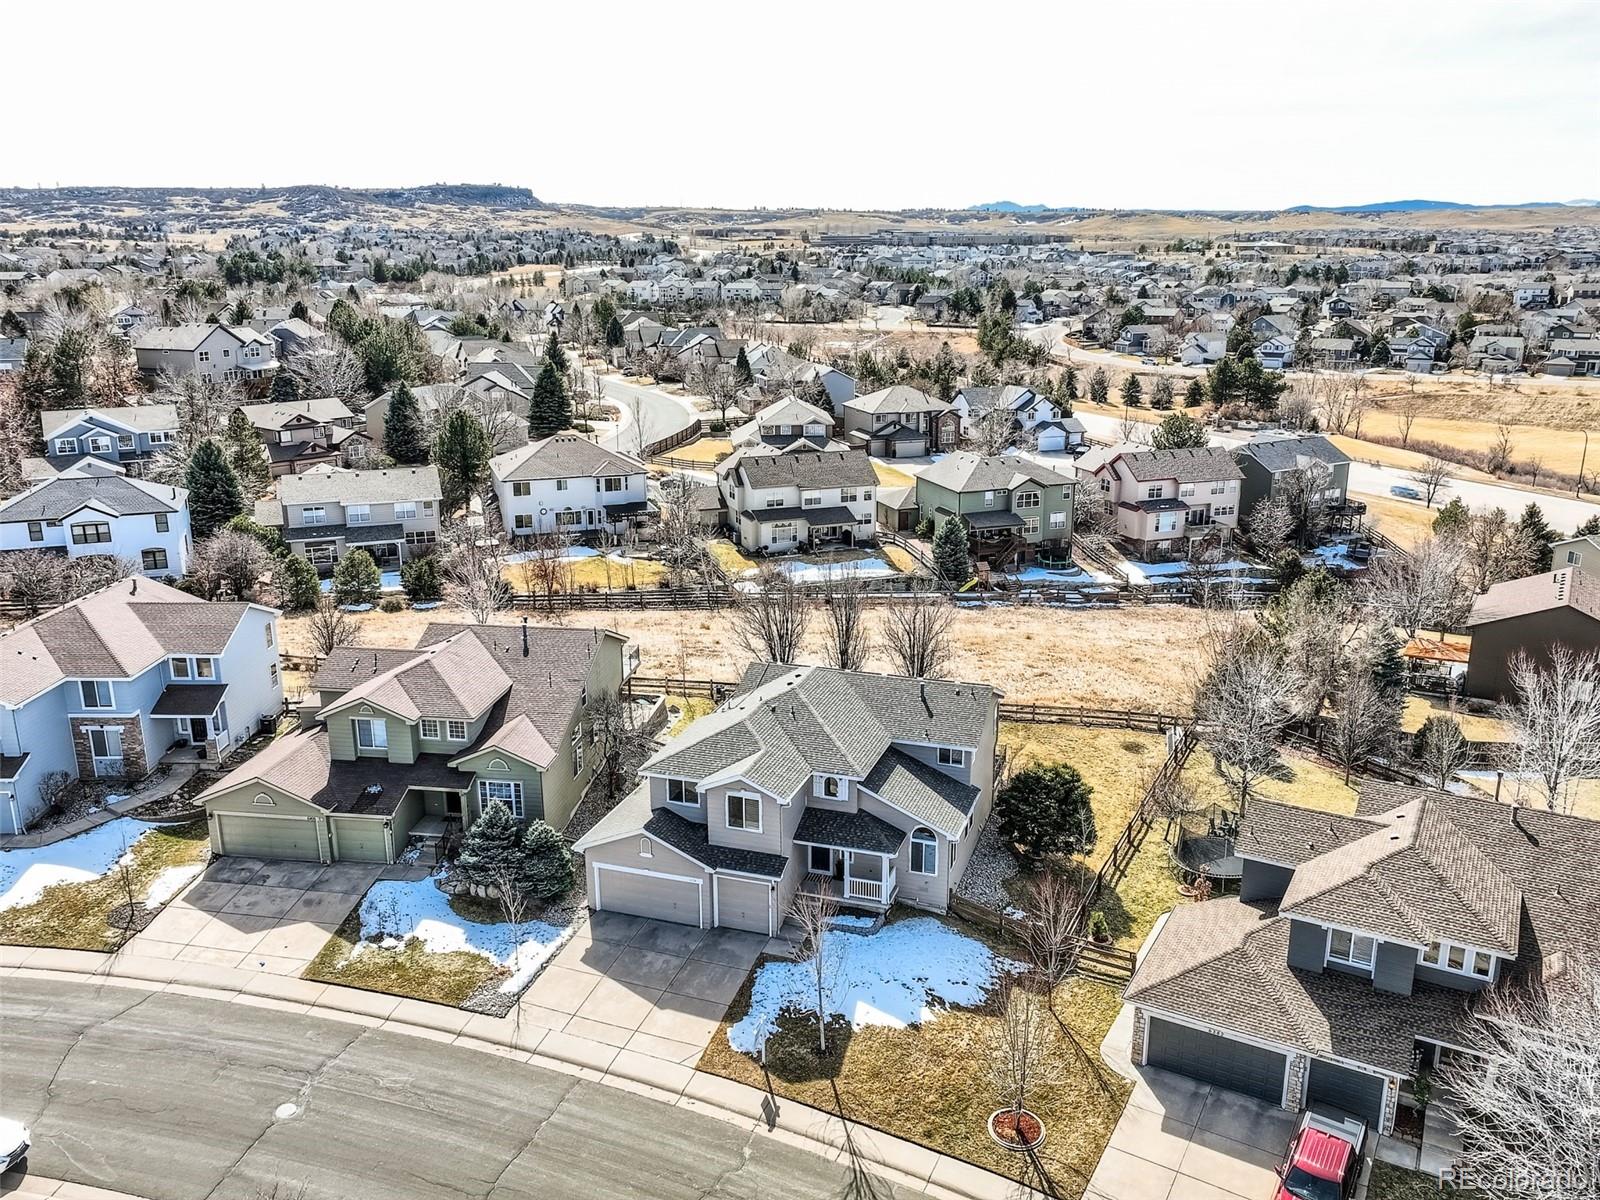 6394  shannon trail, Highlands Ranch sold home. Closed on 2024-03-08 for $840,000.